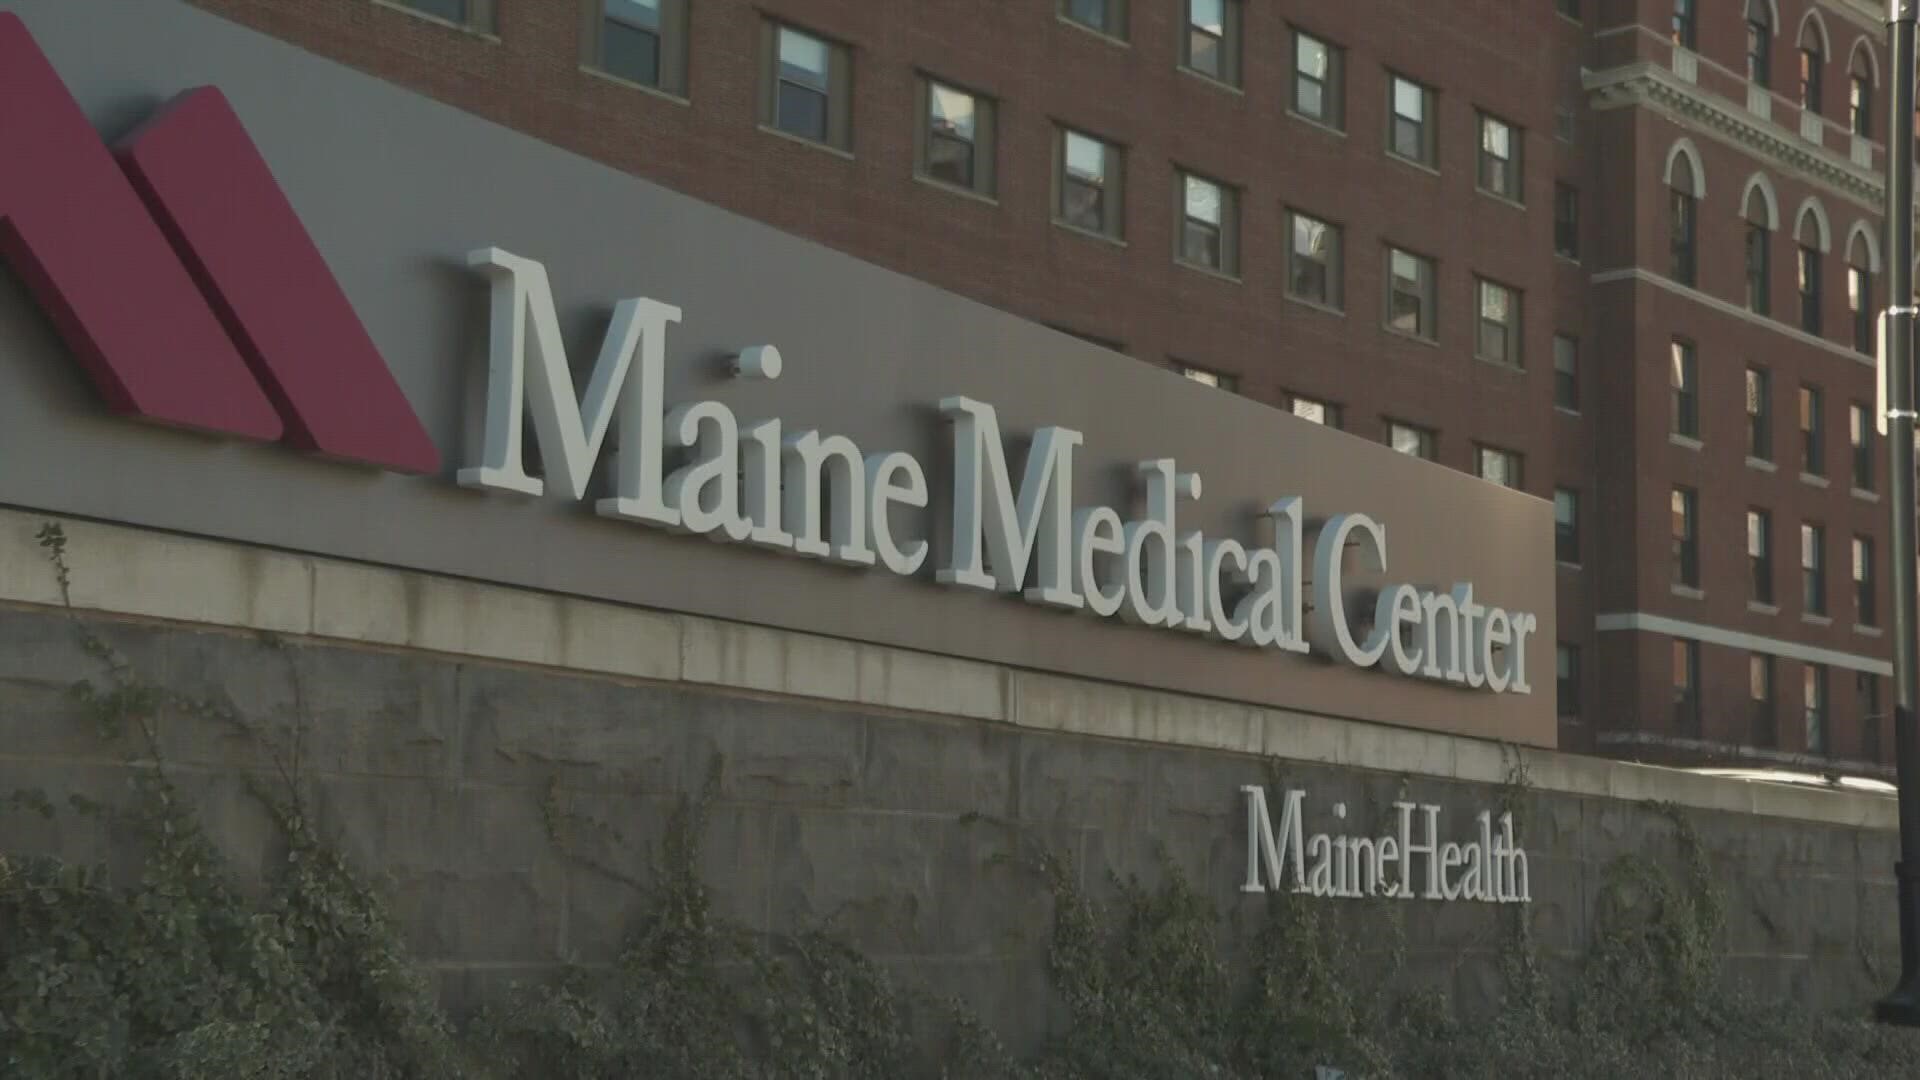 MaineHealth is postponing some elective surgeries and procedures across its entire system, to free up resources to keep up with the surge in COVID-19 cases.